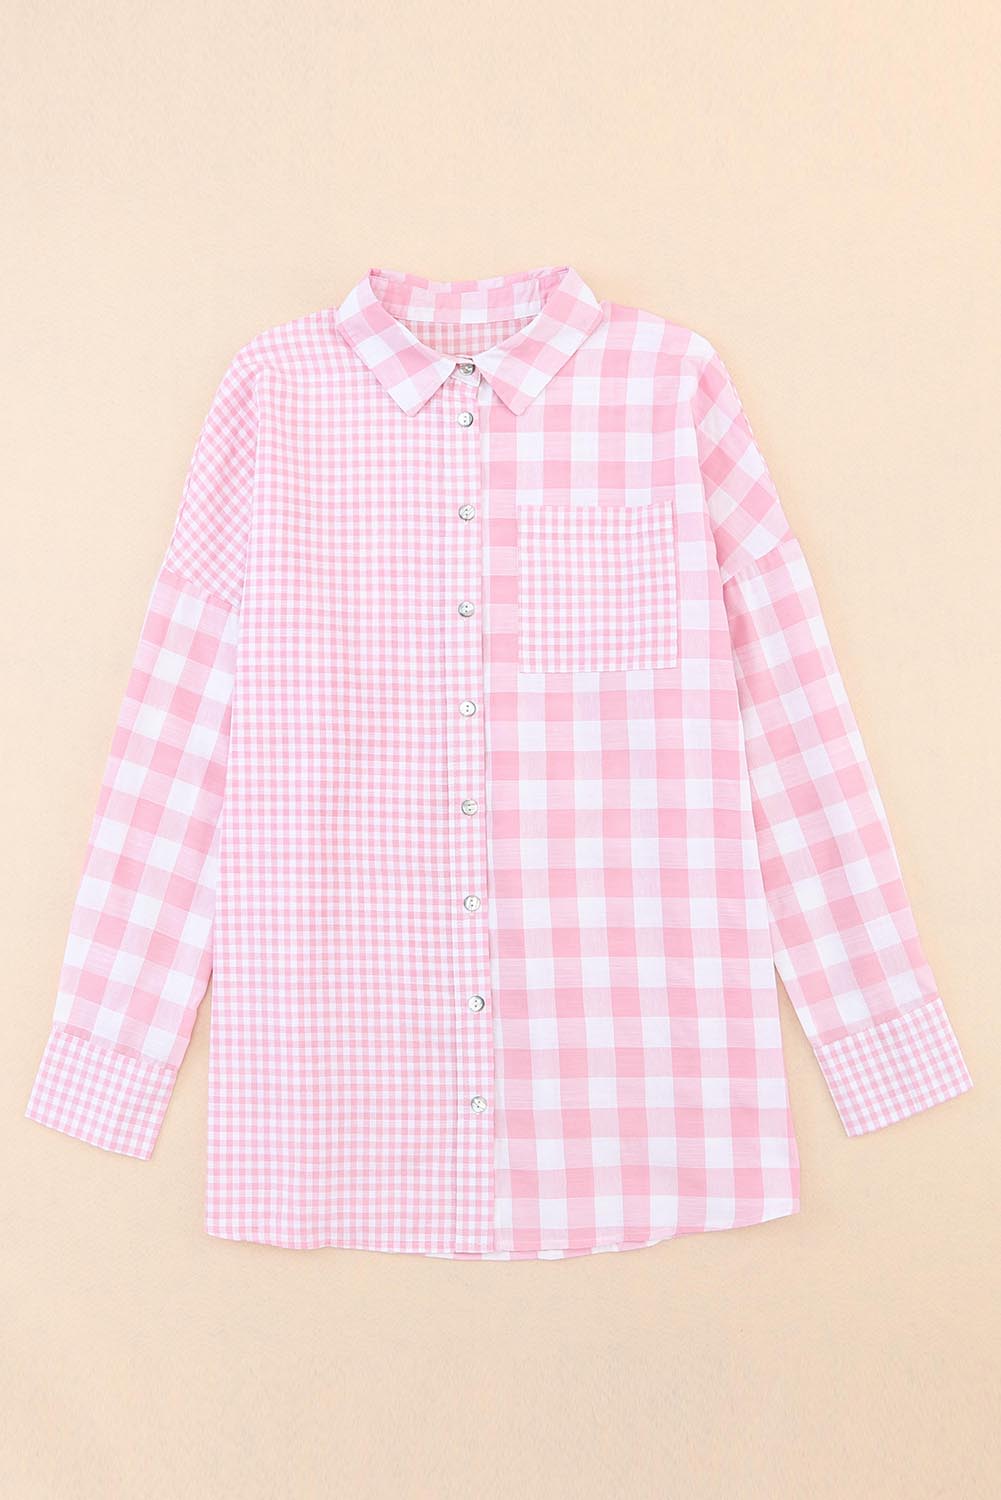 Green Mix Checked Patchwork Long Sleeve Shirt